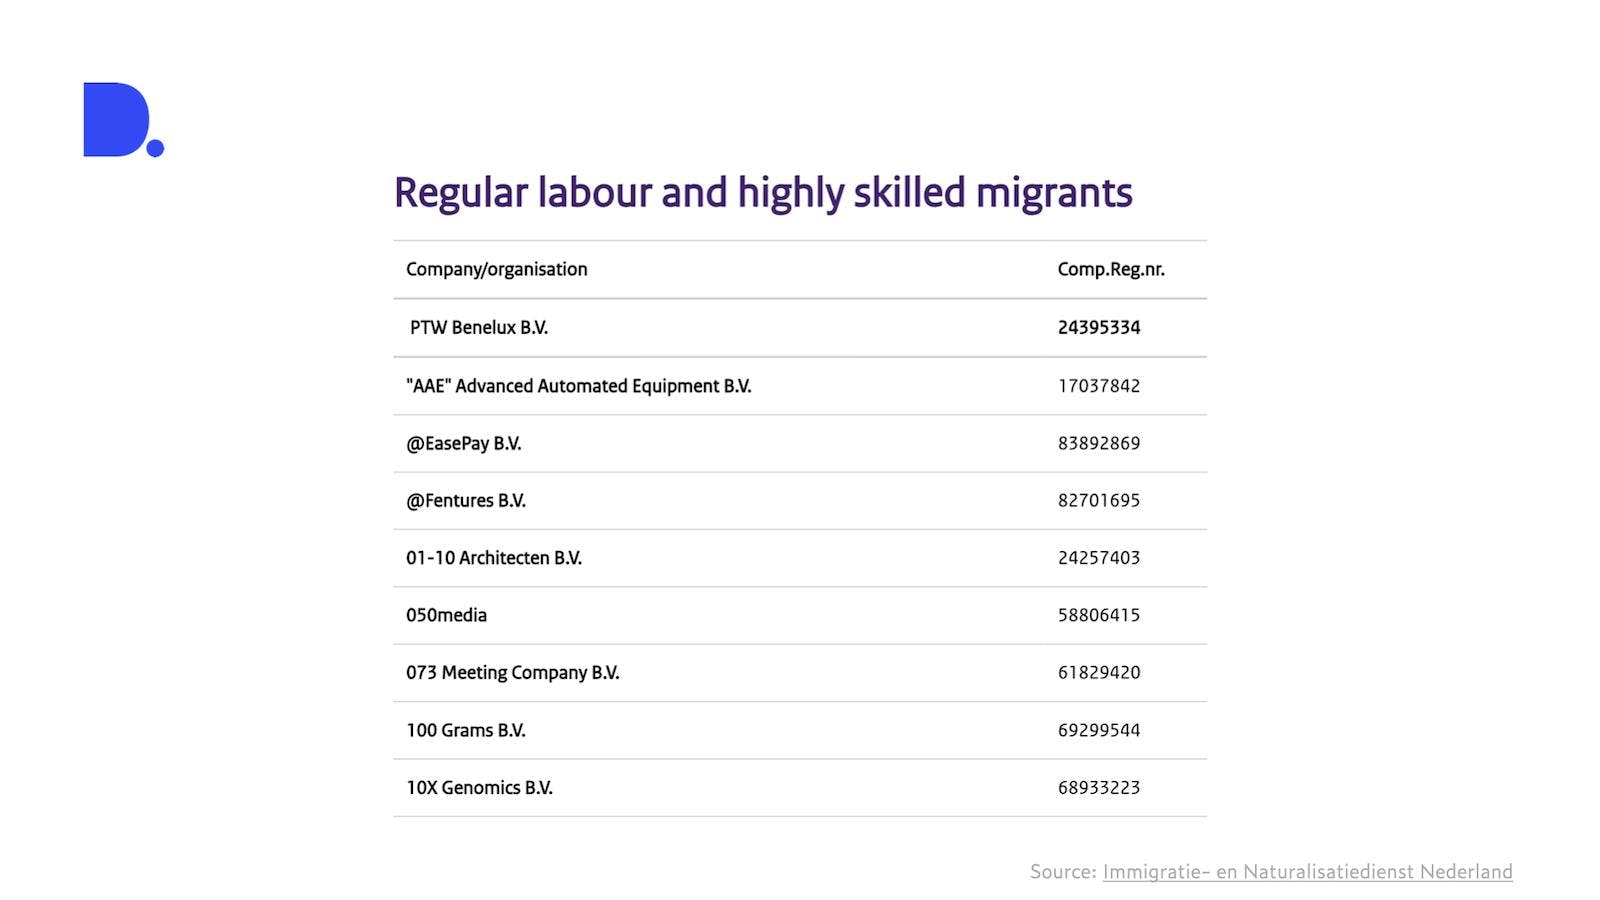 Screenshot of the offical Dutch list of companies offering jobs under the High Skilled Migrant Program. The list shows a few examples of company names with their corresponding Company Registration Number